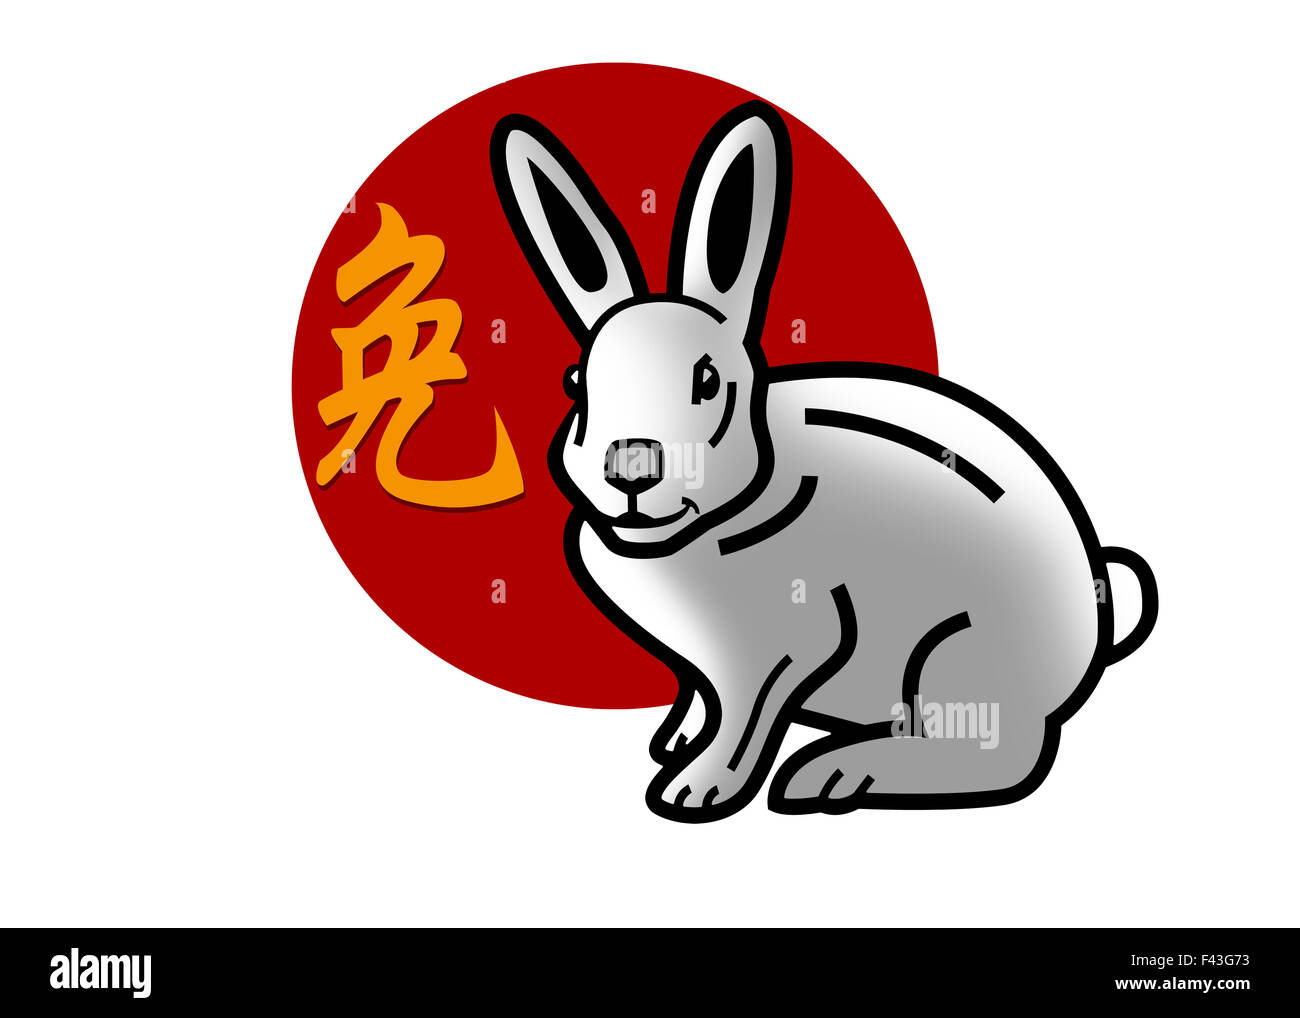 Chinese Zodiac Sign For Year Of The Rabbit Stock Photo 88589063